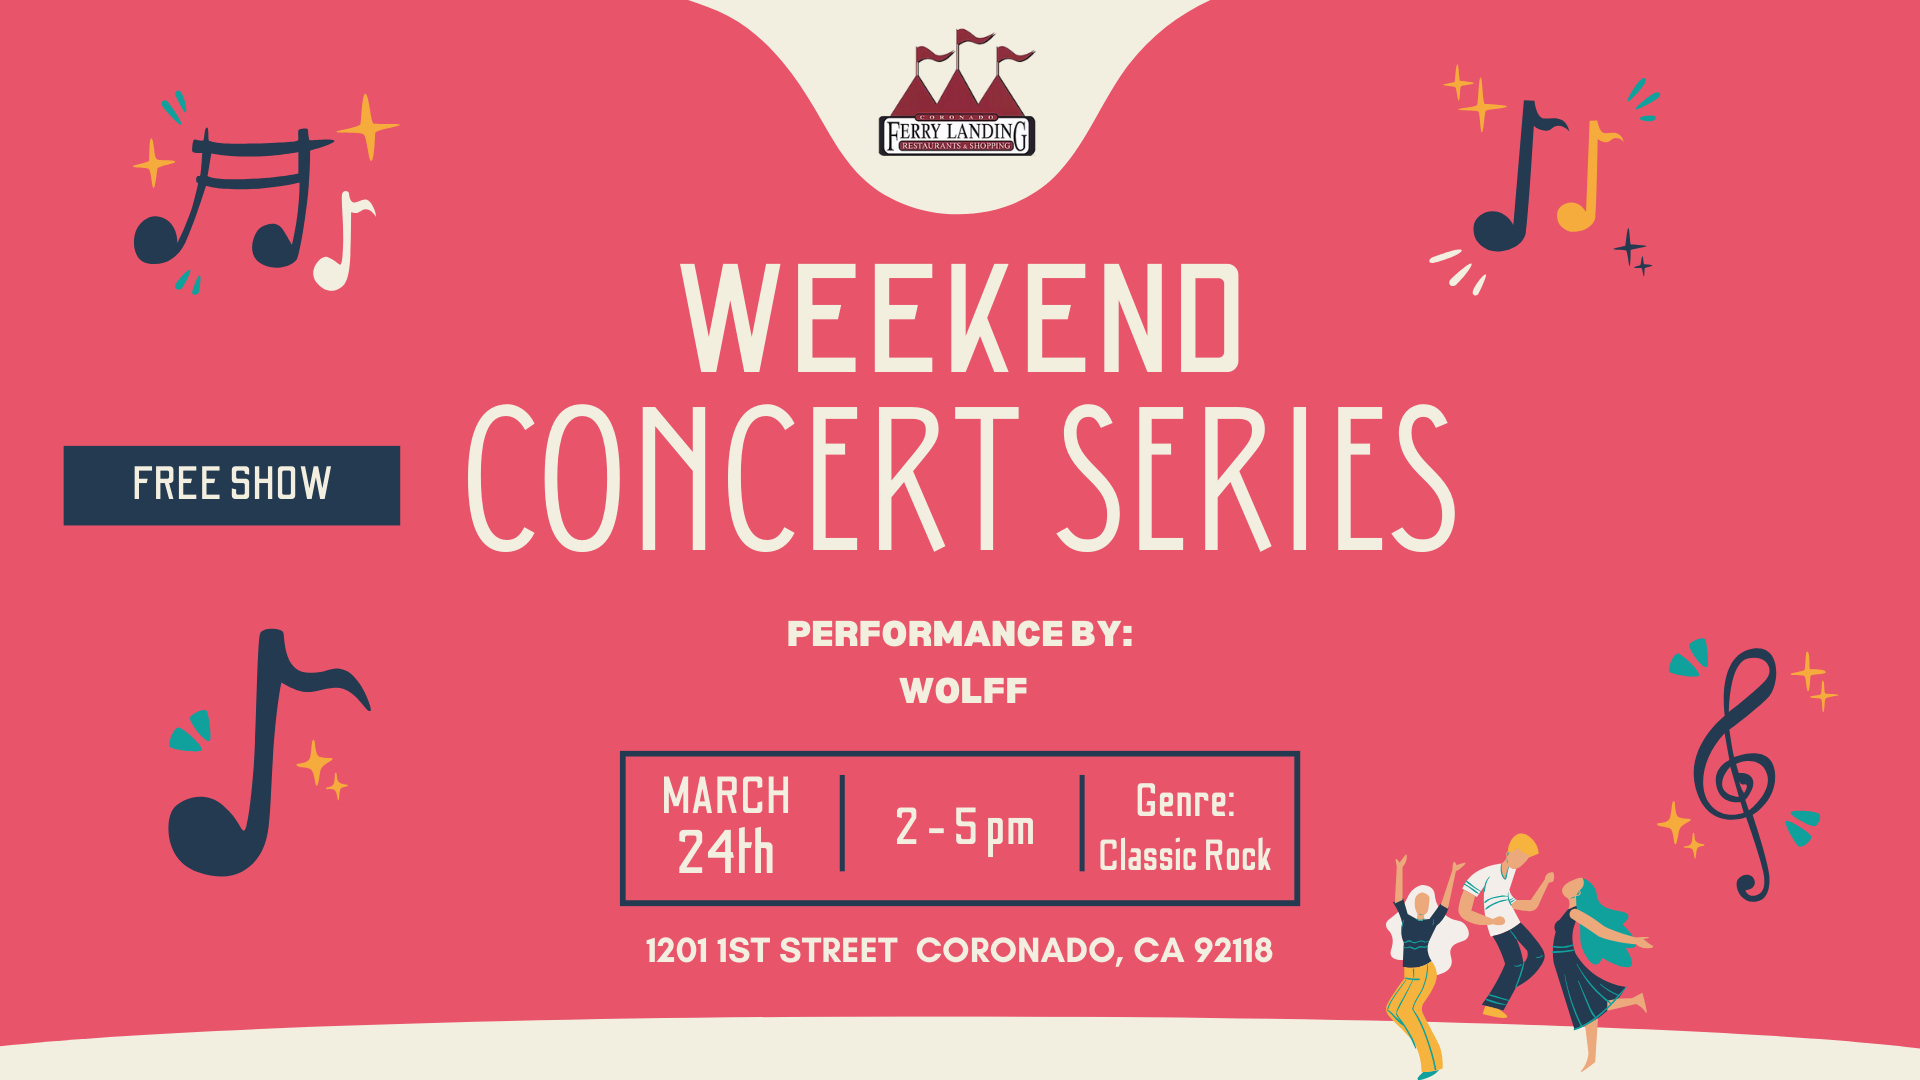 This poster, in a warm pink hue, promotes the 'Weekend Concert Series' at Ferry Landing, showcasing a performance by WOLFF on March 24th from 2-5 pm, with Classic Rock as the genre. The location is given as 1201 1st Street Coronado, CA 92118. A yellow banner at the bottom of the poster states 'FREE SHOW'. Musical notes and joyful confetti are scattered around, with lively dancer silhouettes, emphasizing the event's energy.